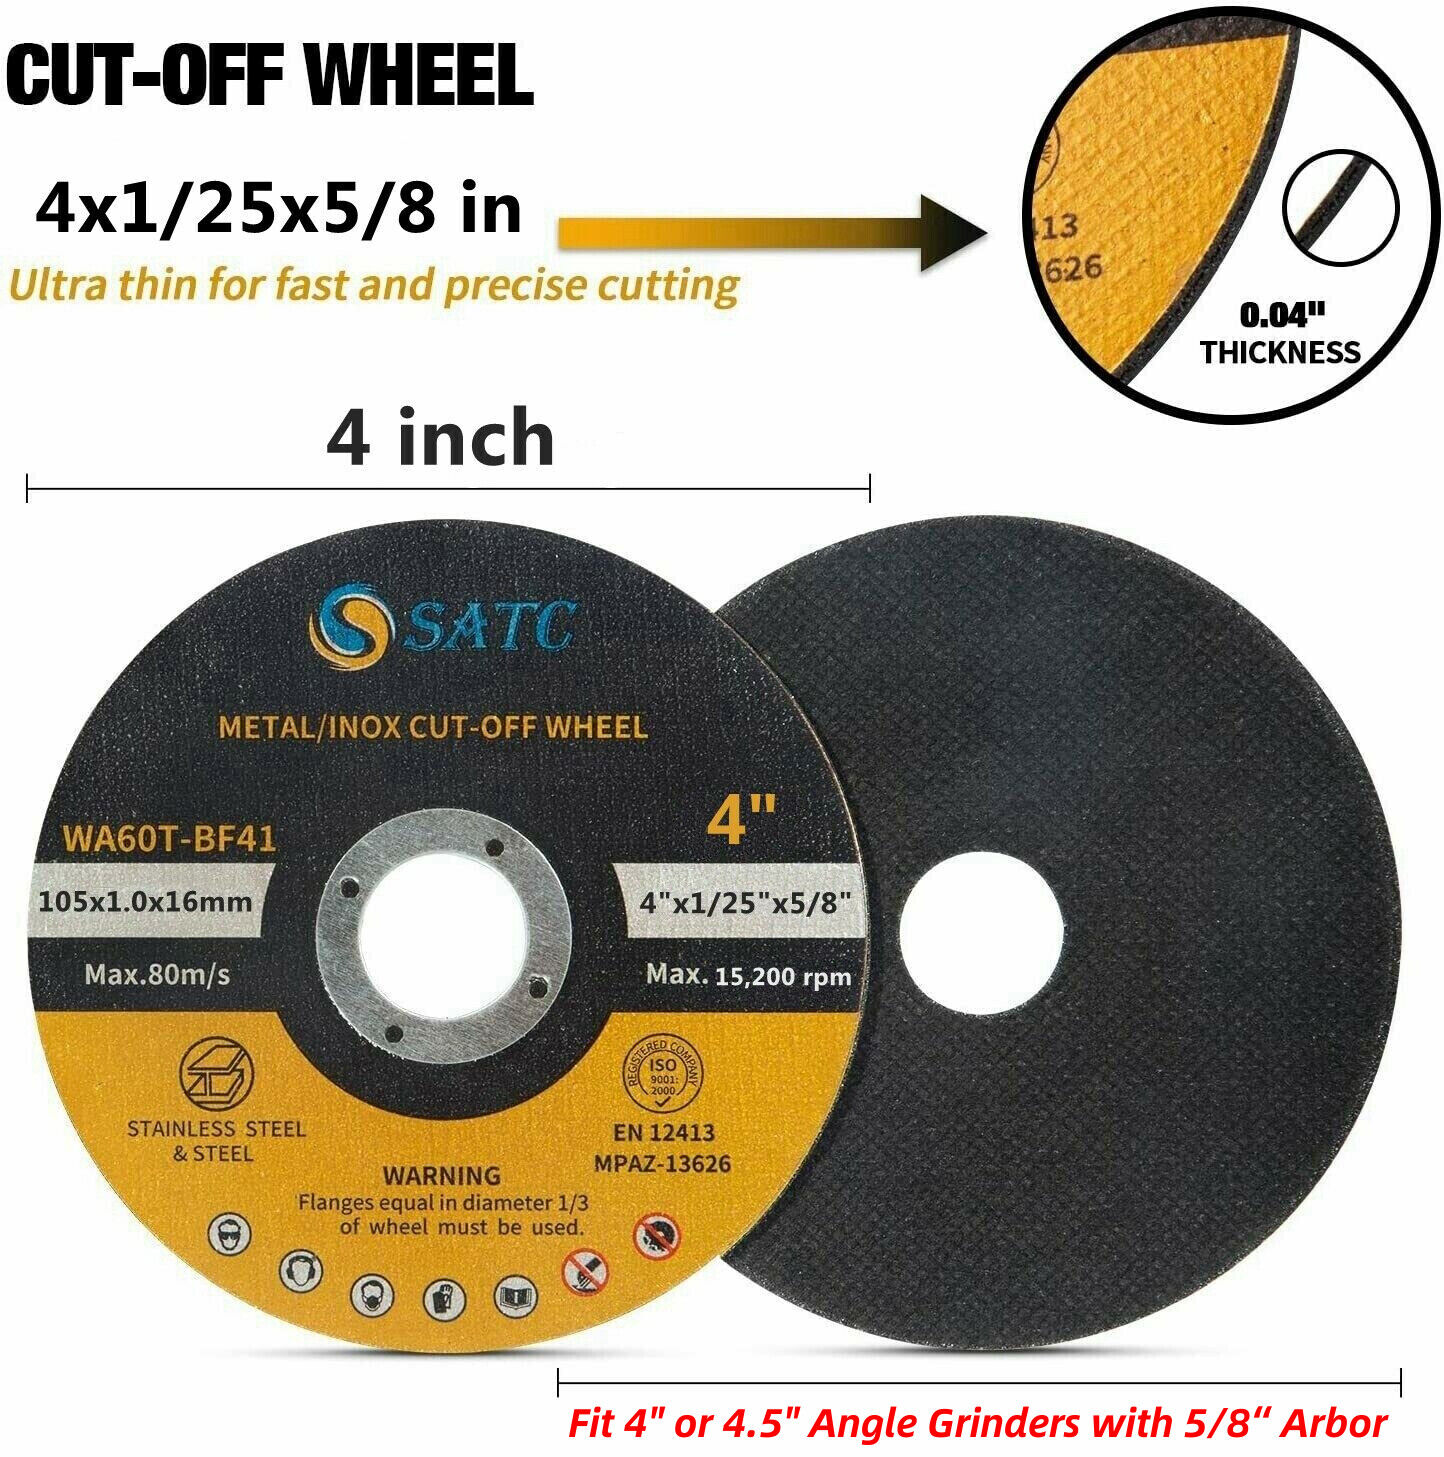 50 Pack 4 inch Metal Cut Off Wheels with 5/8" Arbor Angle Grinder Cutting Disc Satc Does Not Apply - фотография #4